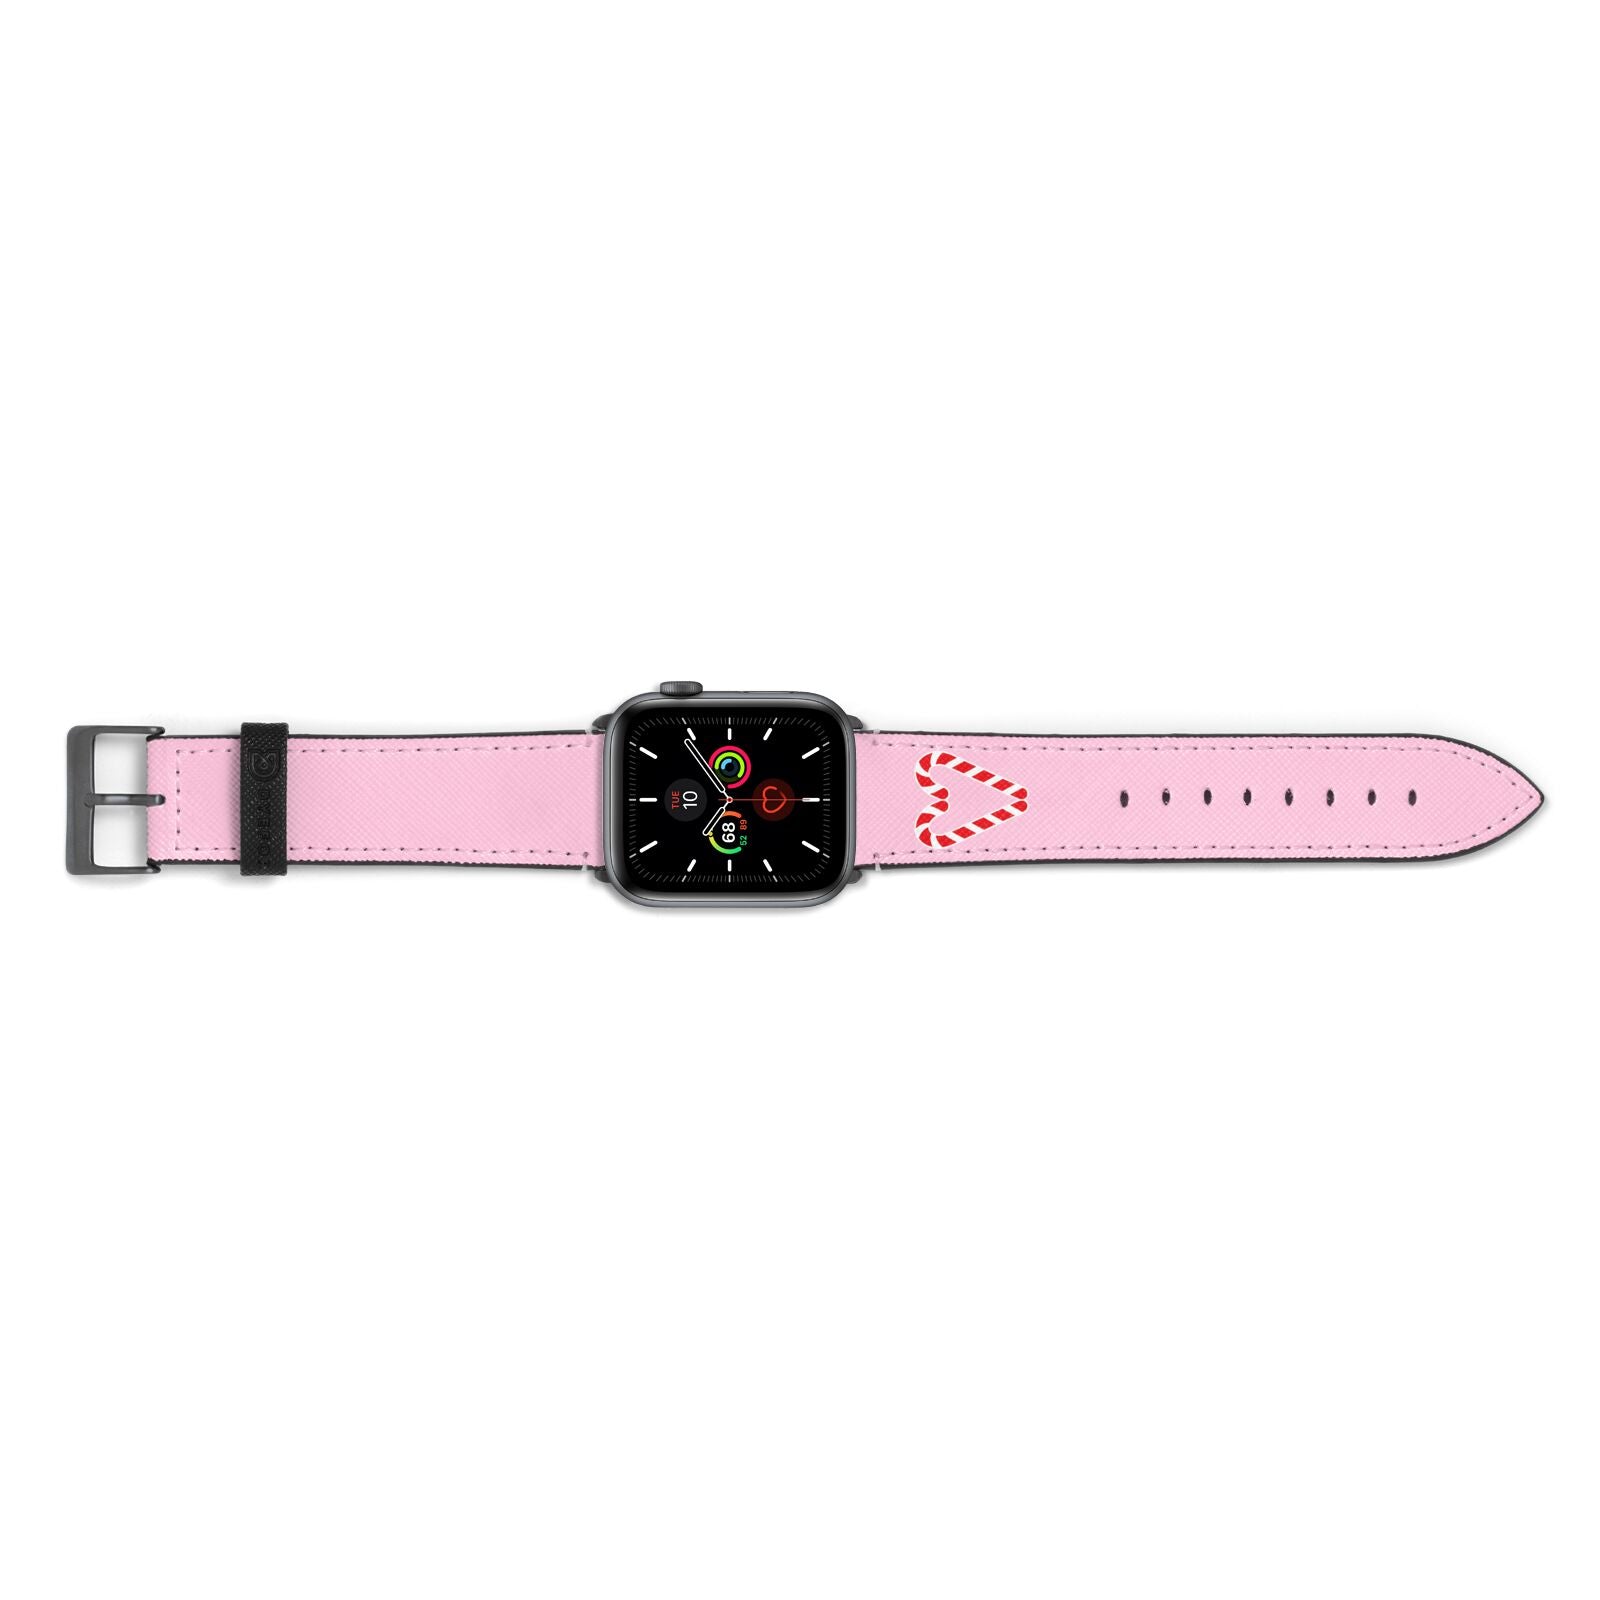 Candy Cane Heart Apple Watch Strap Landscape Image Space Grey Hardware